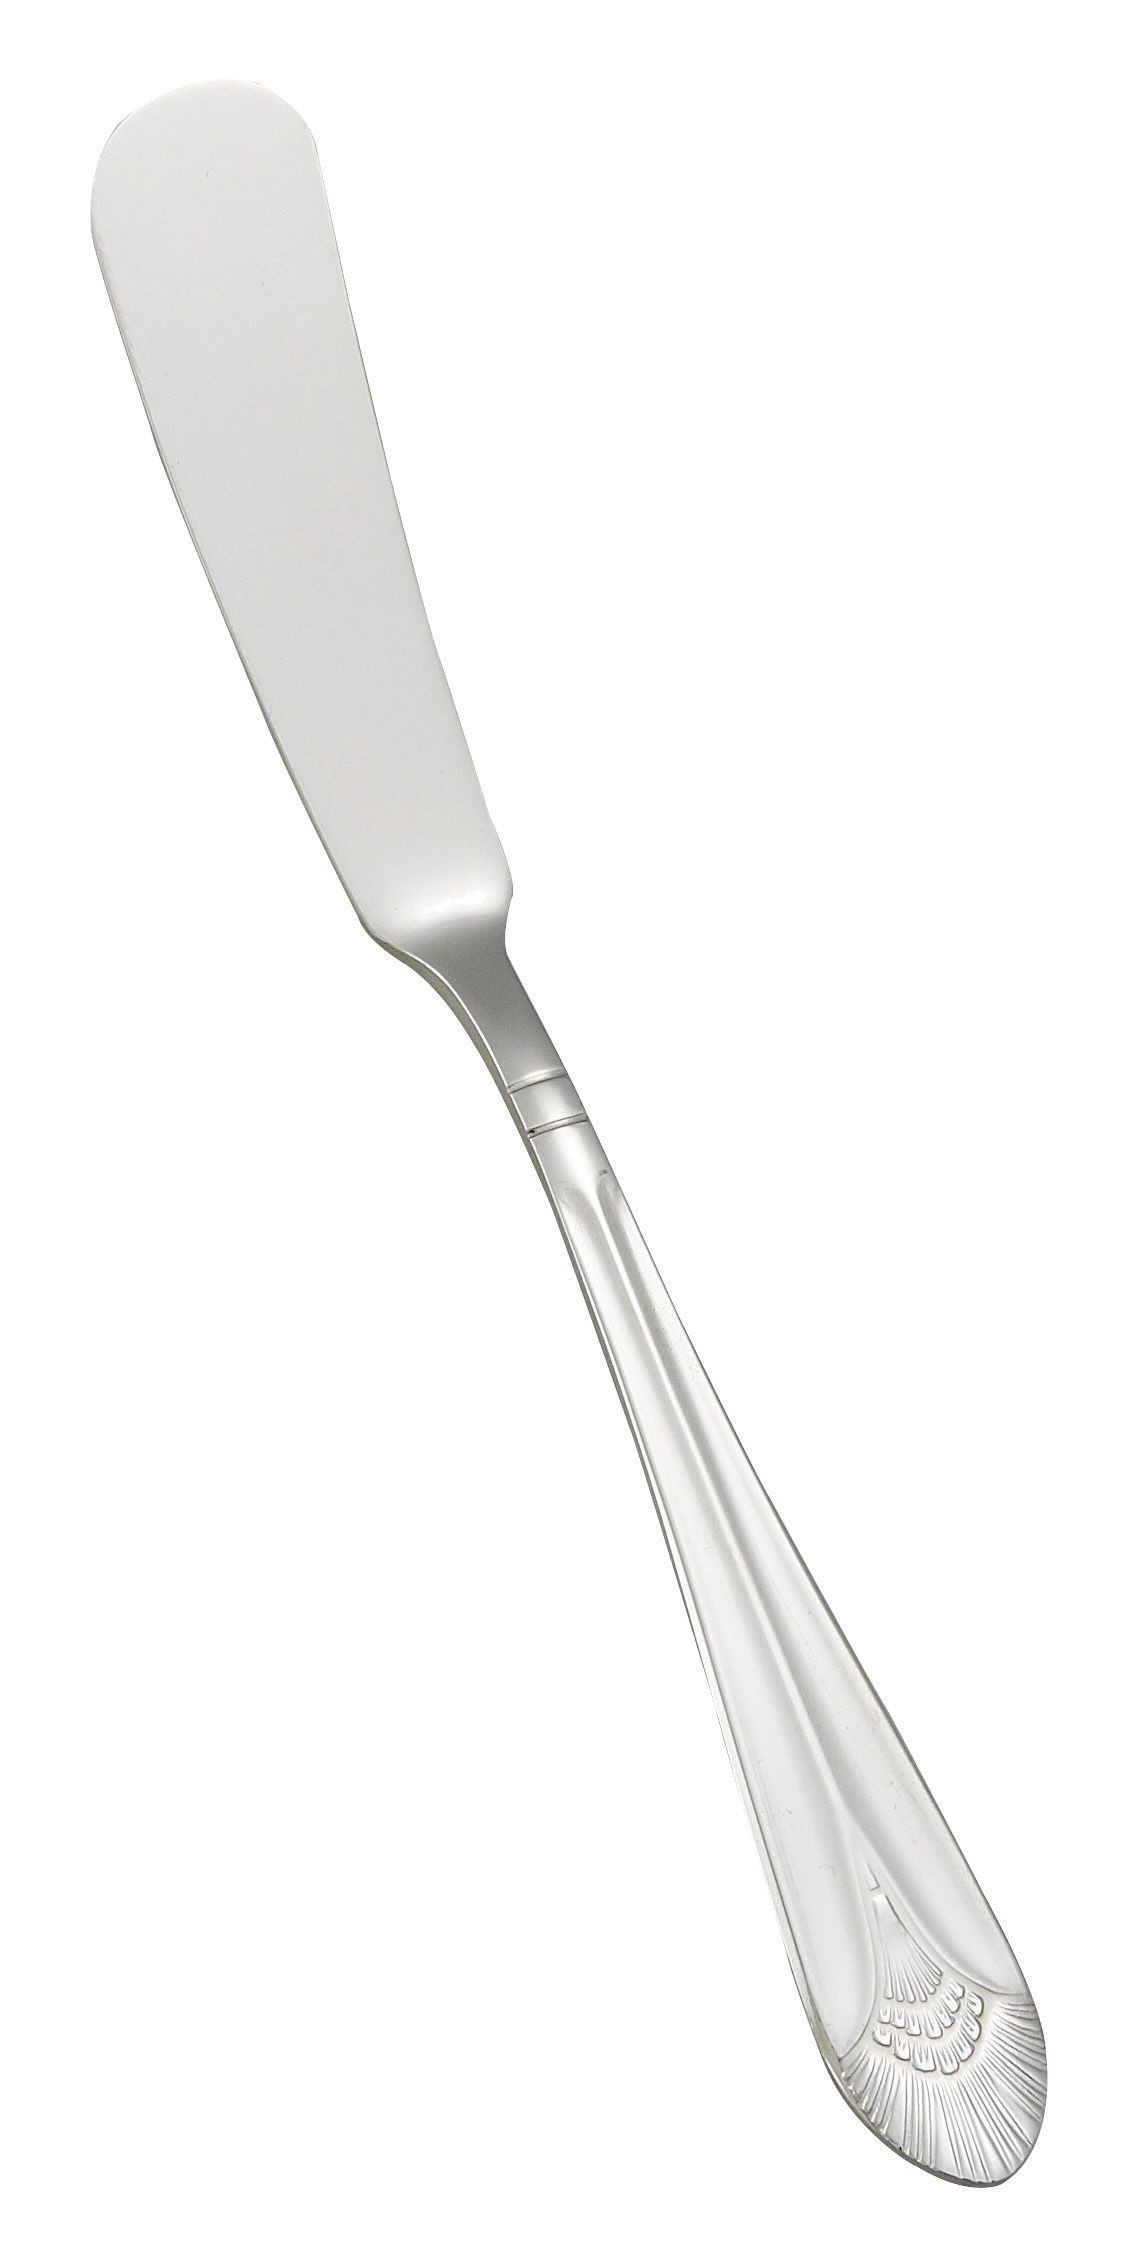 Winco 0031-12 Peacock Extra Heavy Stainless Steel Butter Spreader (12/Pack)